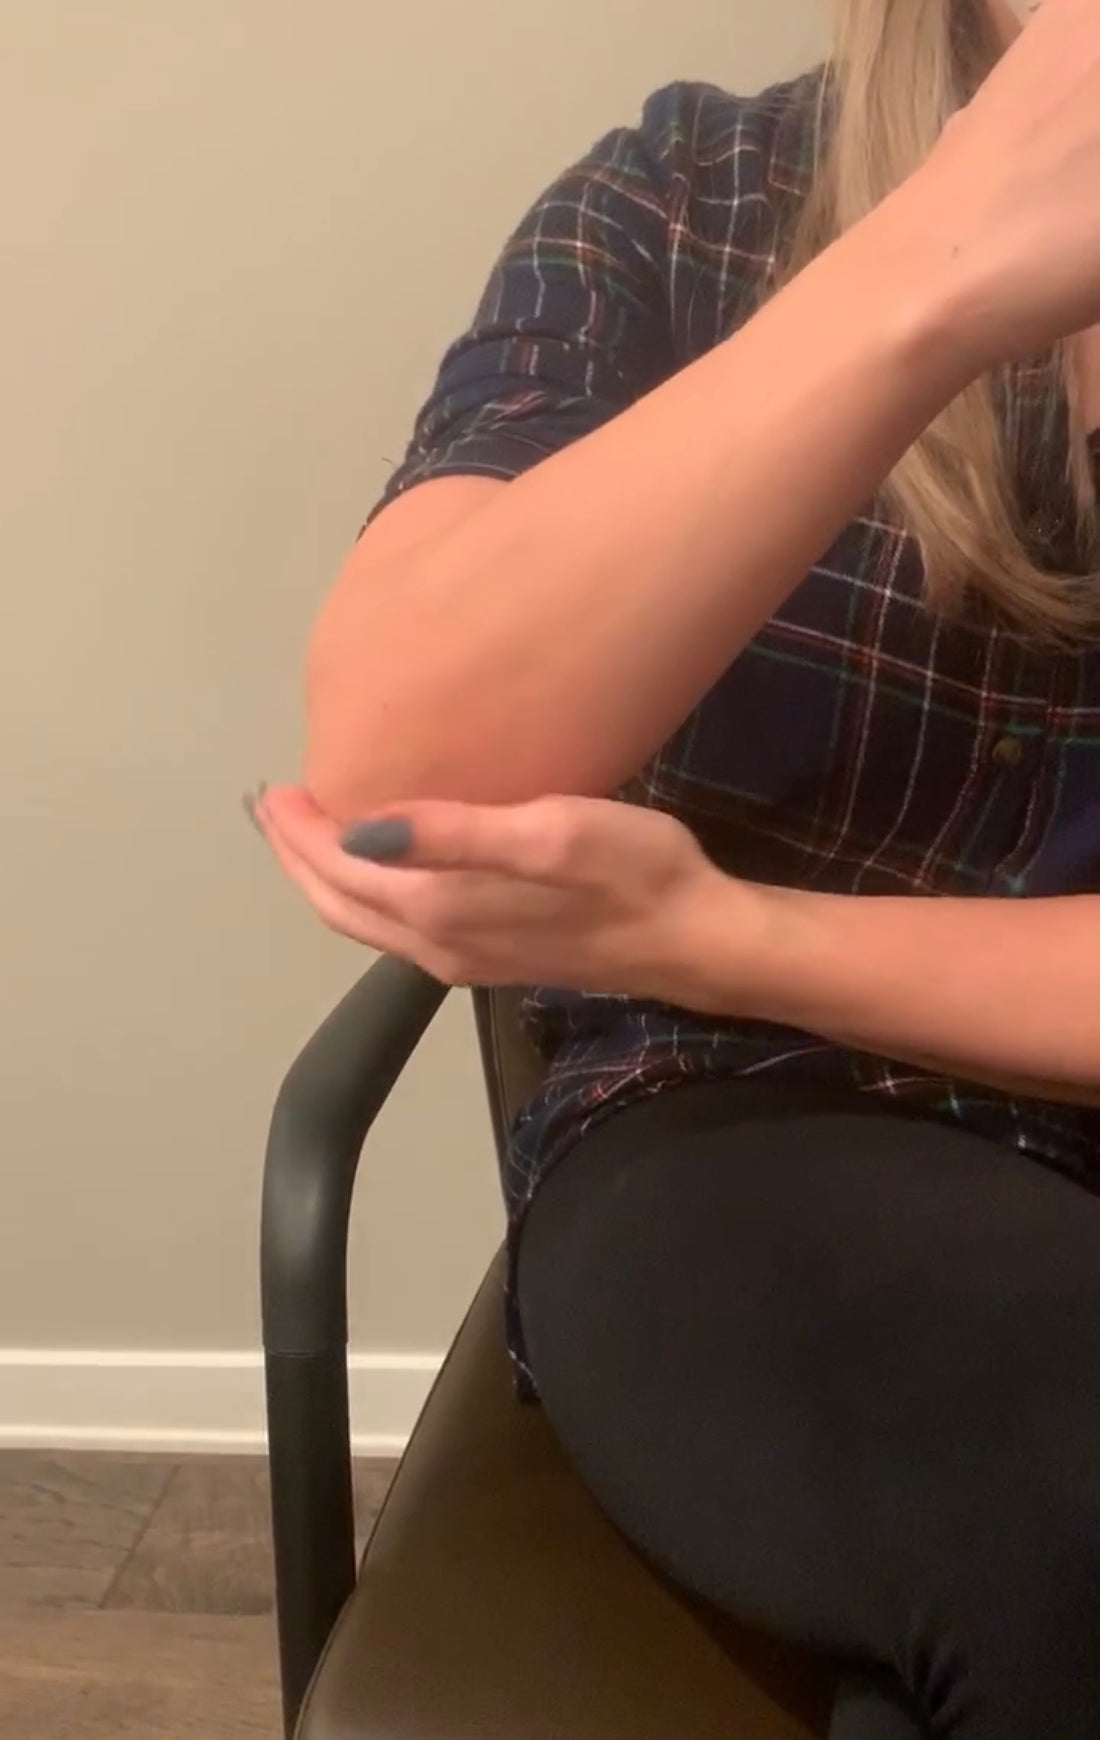 What You Need to Know About Elbow Bursitis